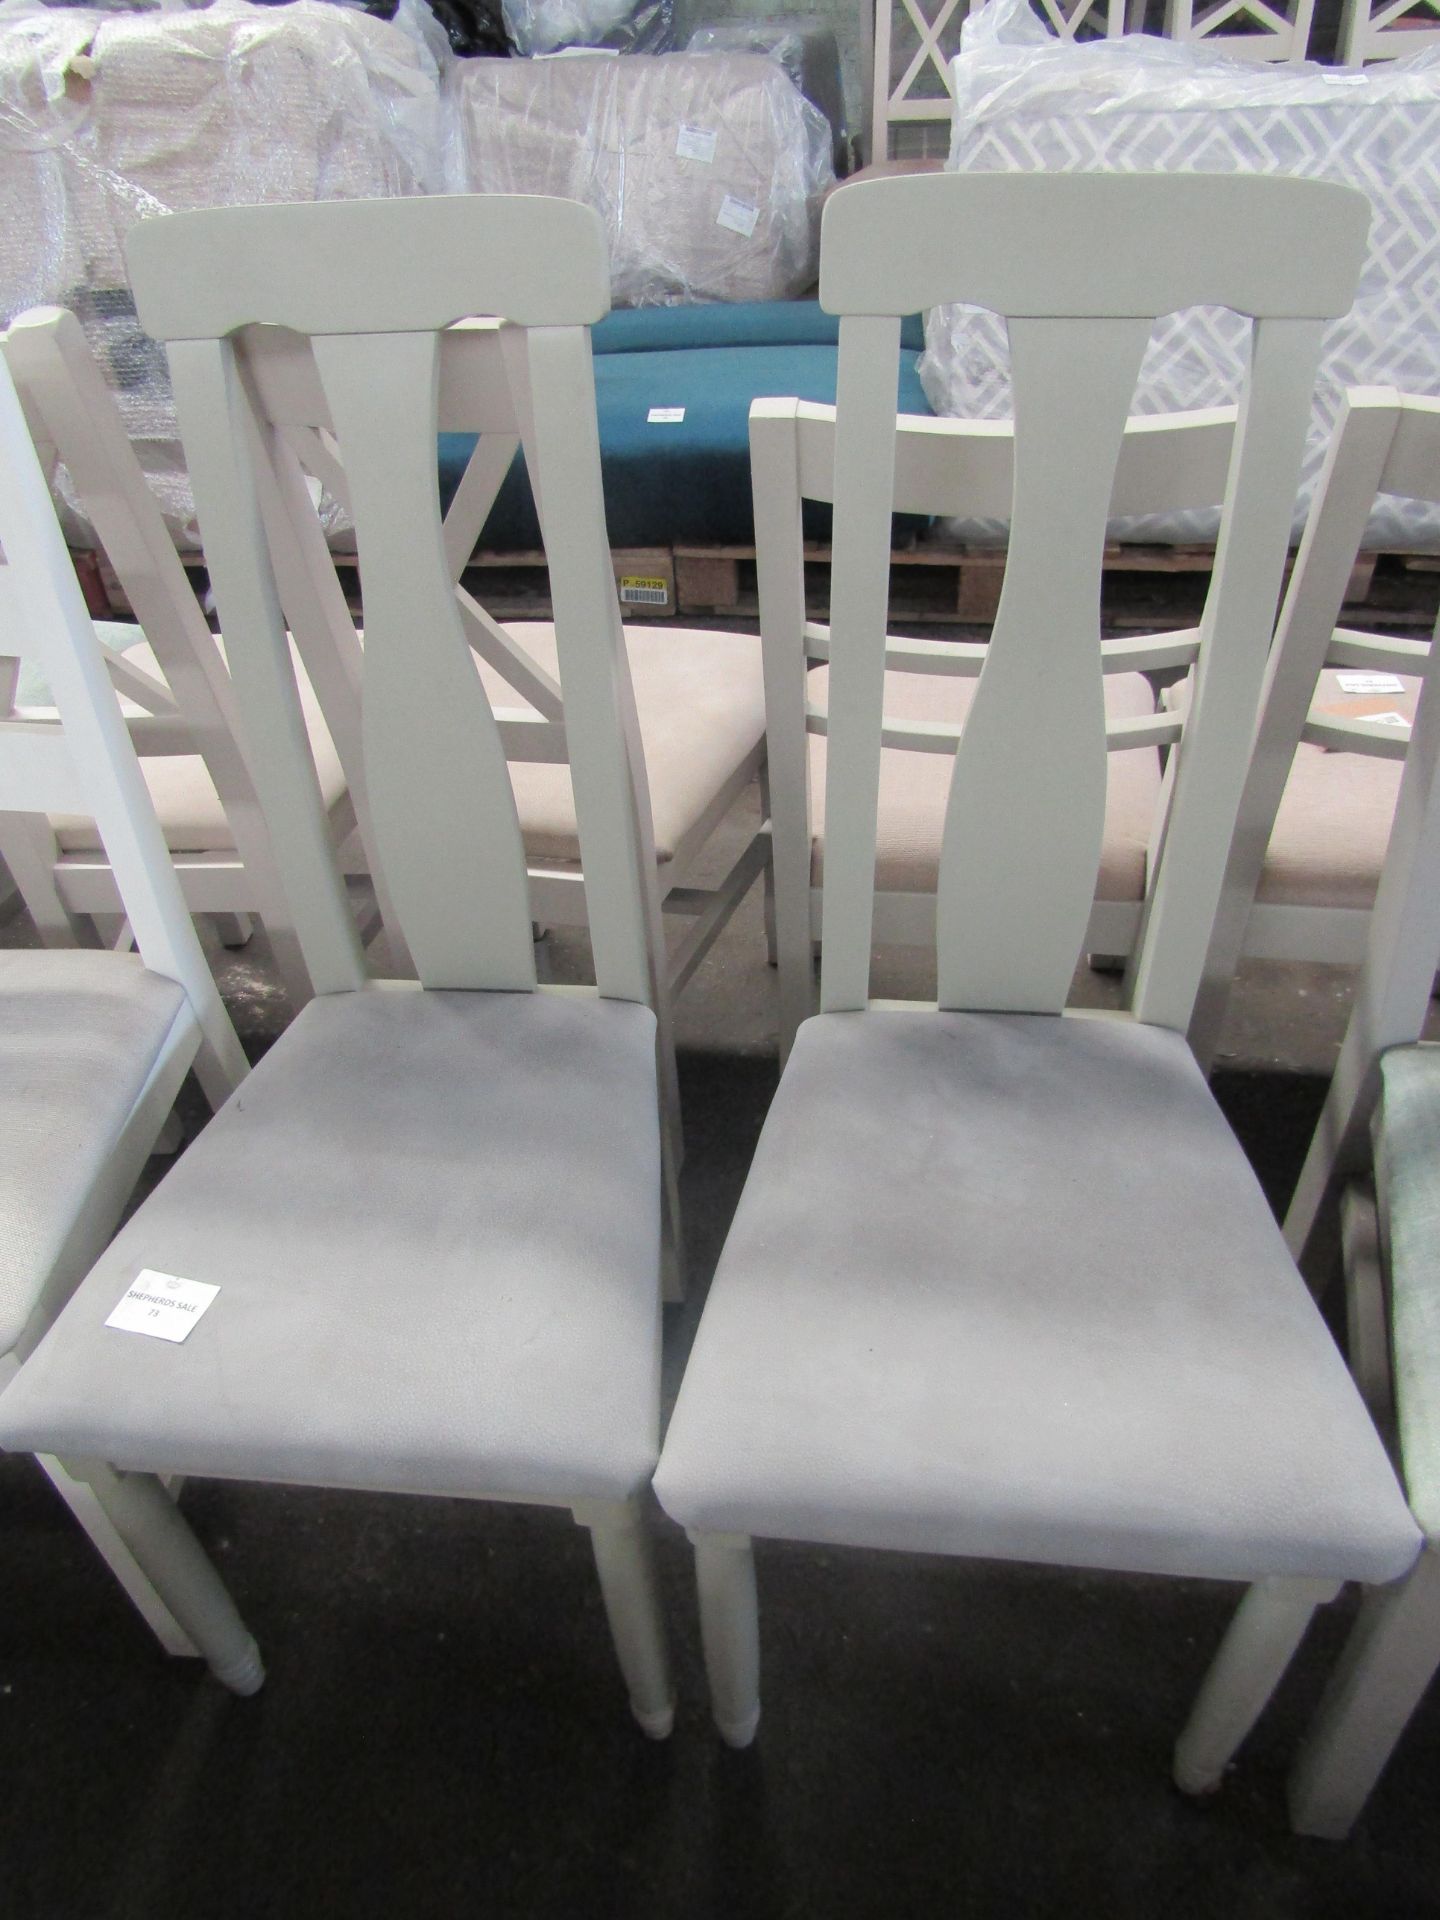 Oak Furnitureland Brindle Painted Chair with Dappled Silver Fabric Seat (Pair) RRP 380.00About the